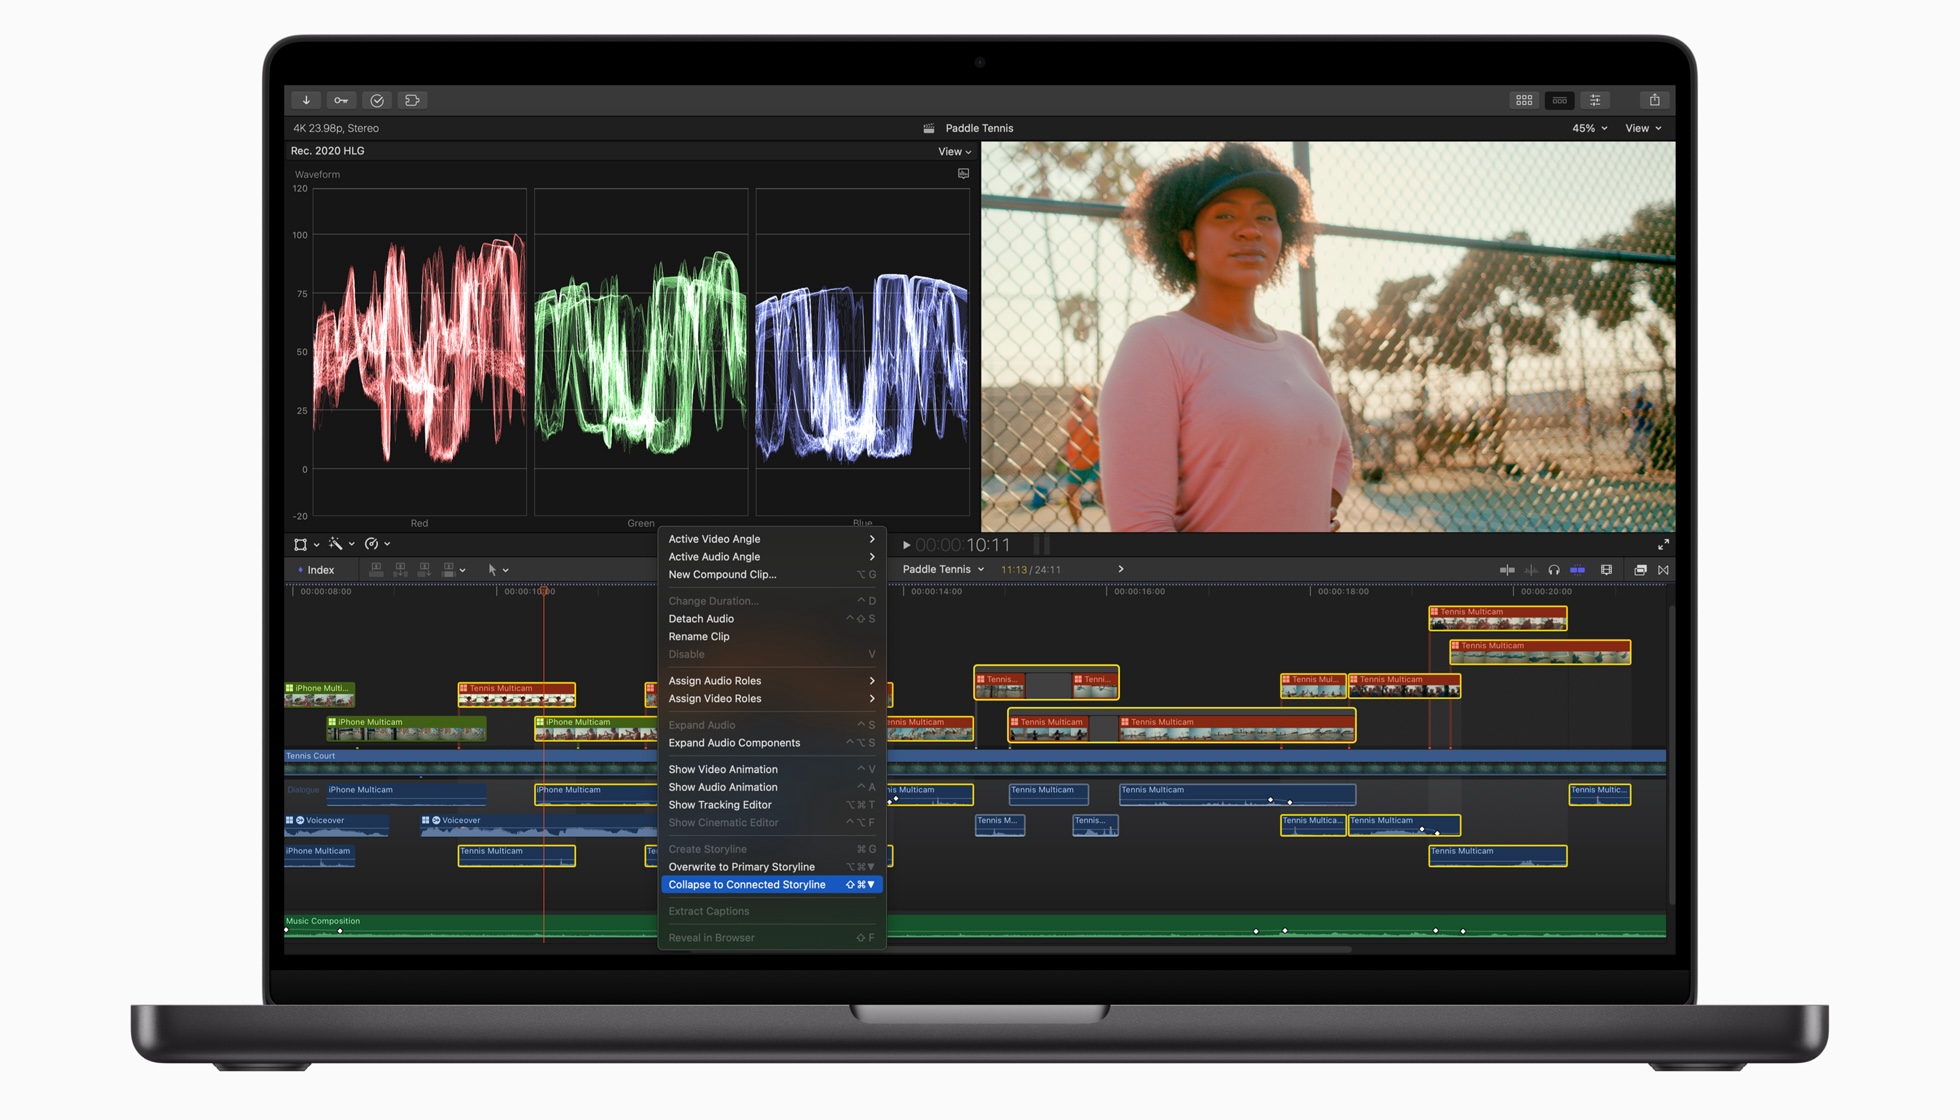 Connected Storylines in Final Cut Pro 10.7